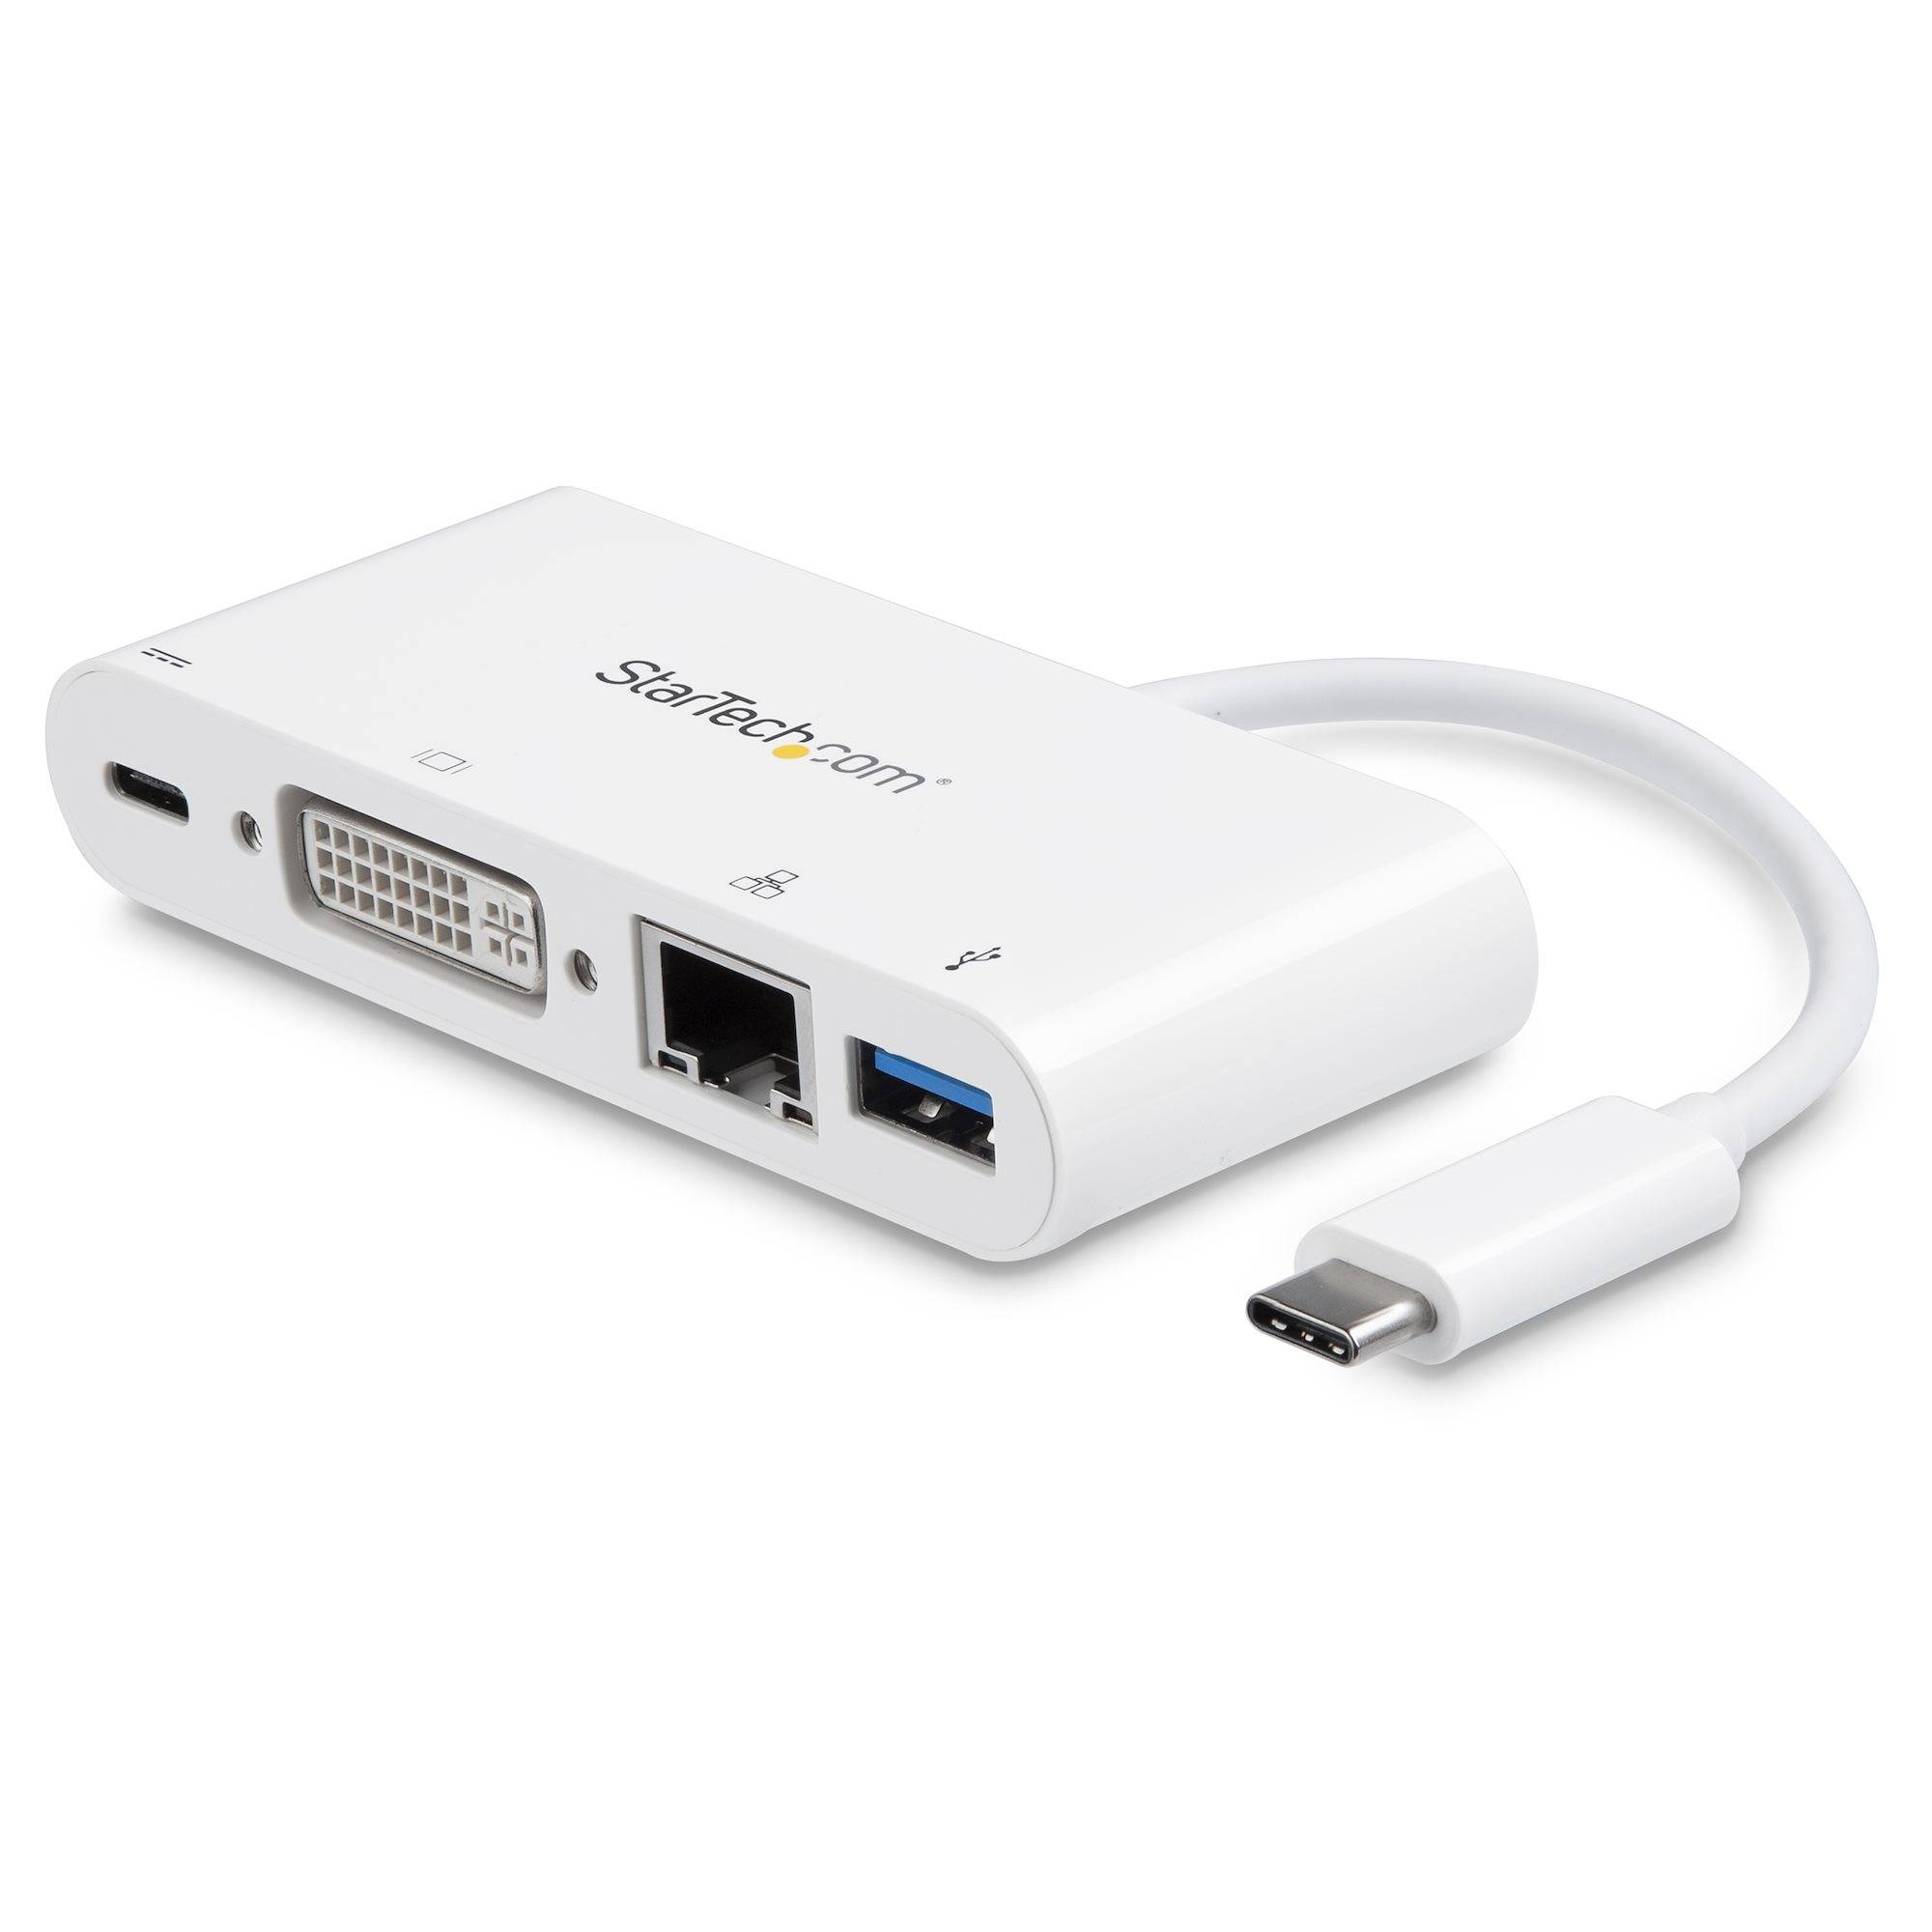 Rca Informatique - image du produit : USB-C MULTIPORT ADAPTER - WITH POWER DELIVERY DVI GBE - USB 3